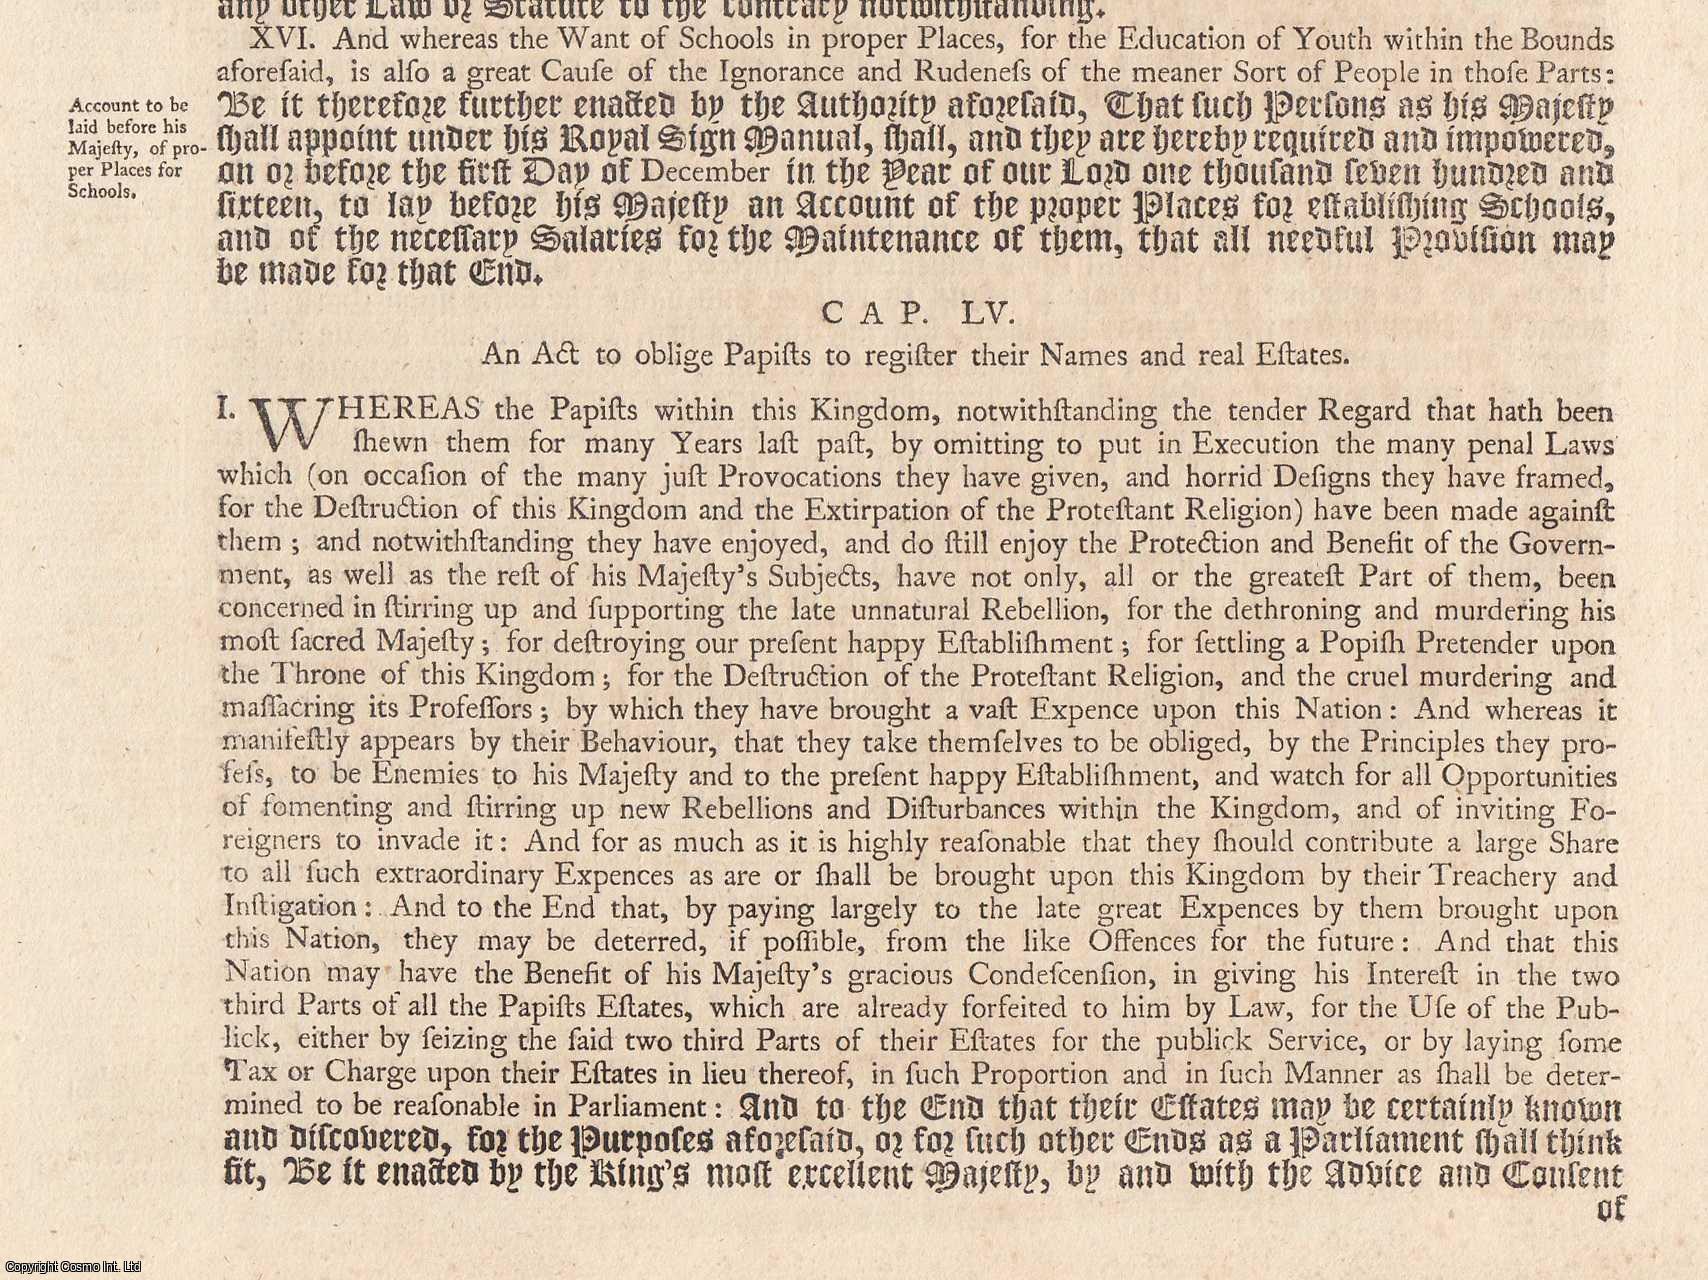 King George I - Papists Act 1715 c. 55. An Act to Oblige Papists to Register their Names and Real Estates.